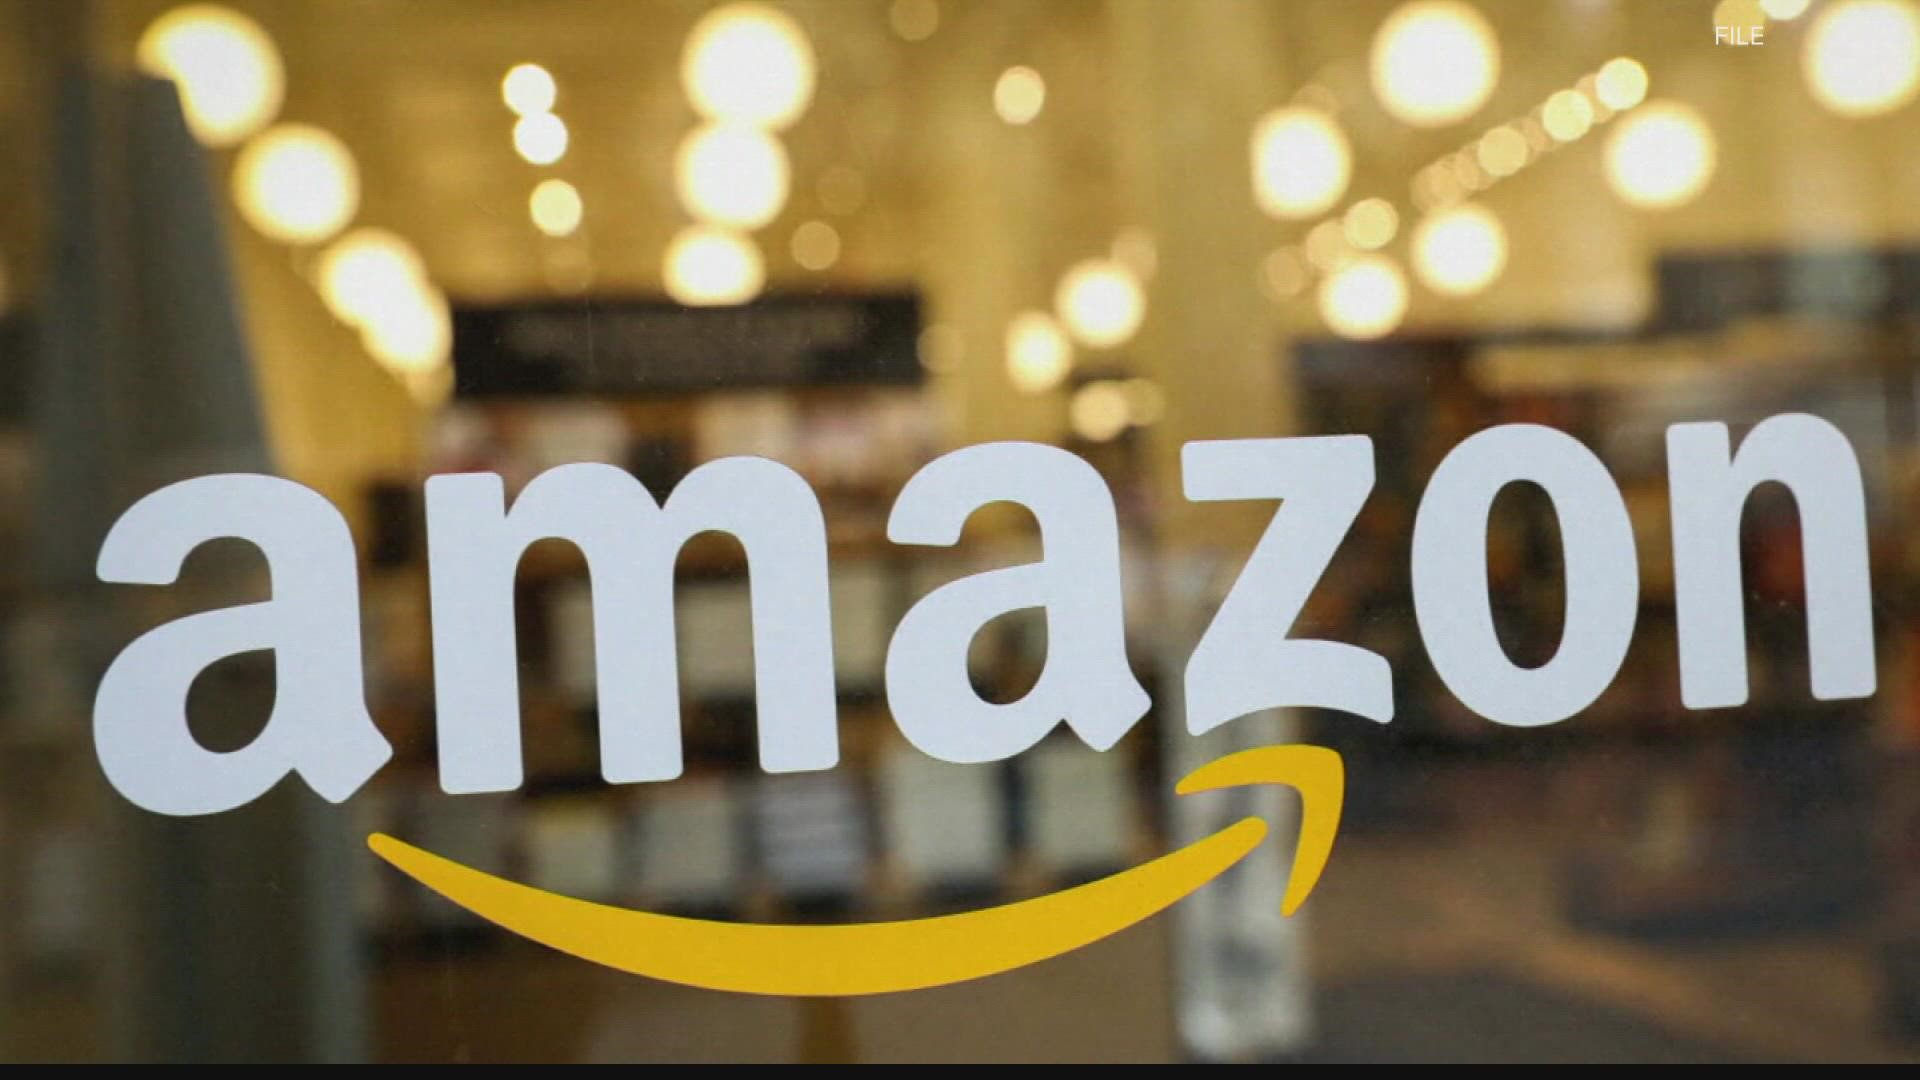 Amazon said the groups were set up to recruit people willing to post "misleading" reviews in return for money or free products.